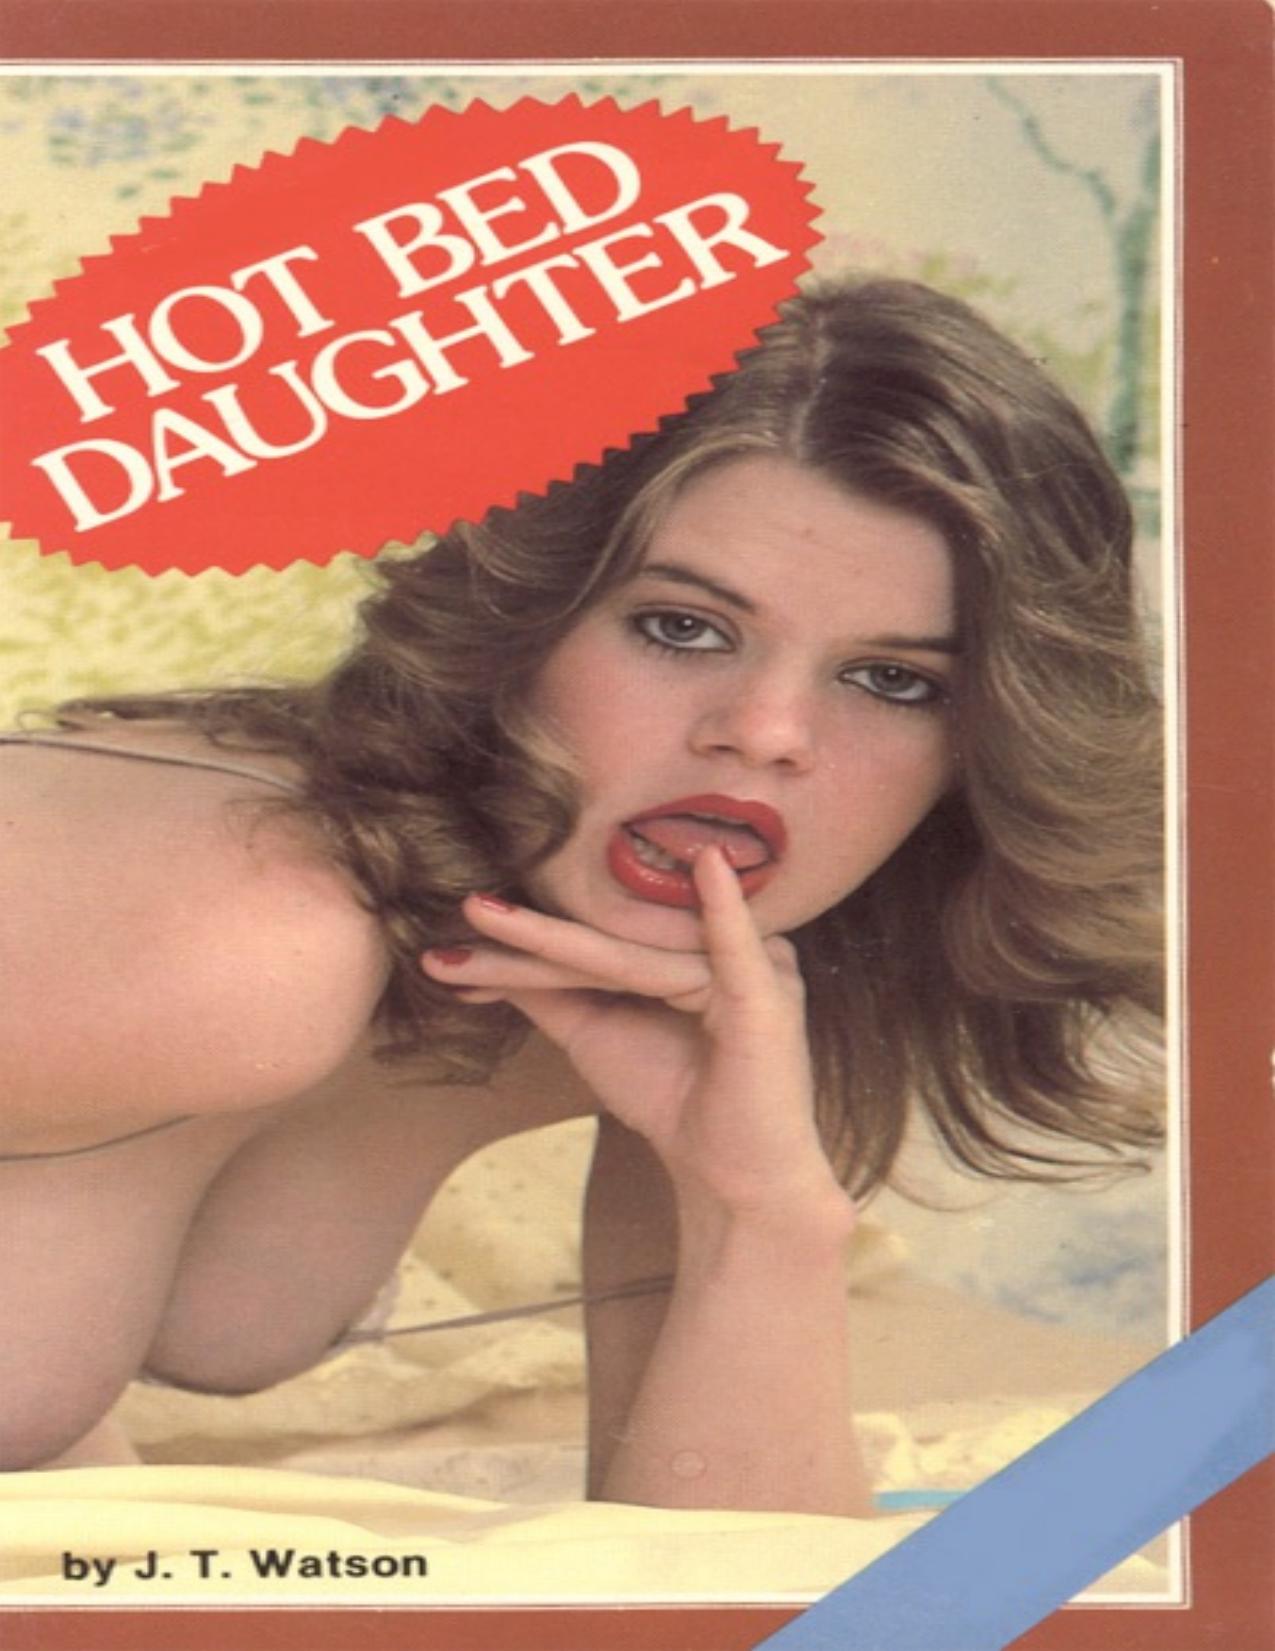 Hot Bed Daughter by J.T. Watson